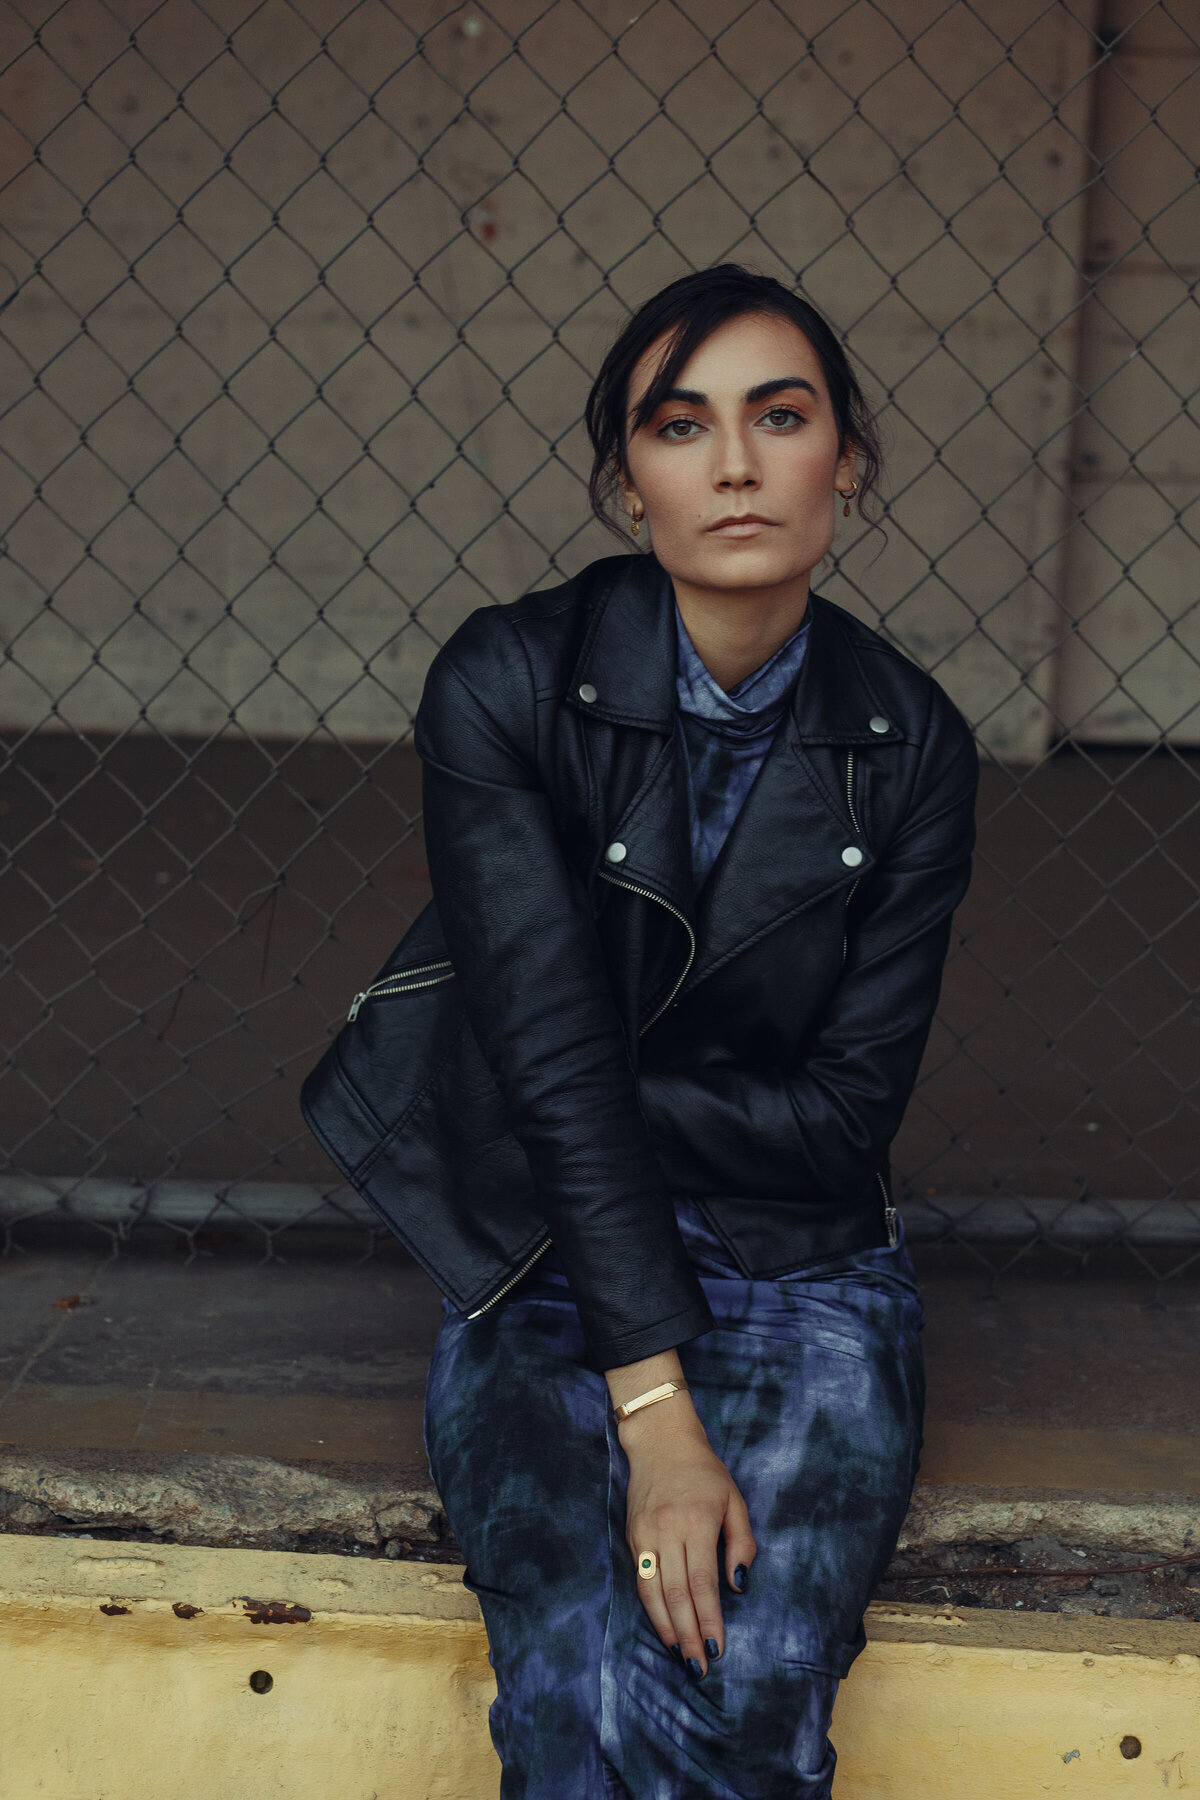 Portrait Photo Of Young Woman In Black Leather Jacket Sitting On Cement Ground Los Angeles